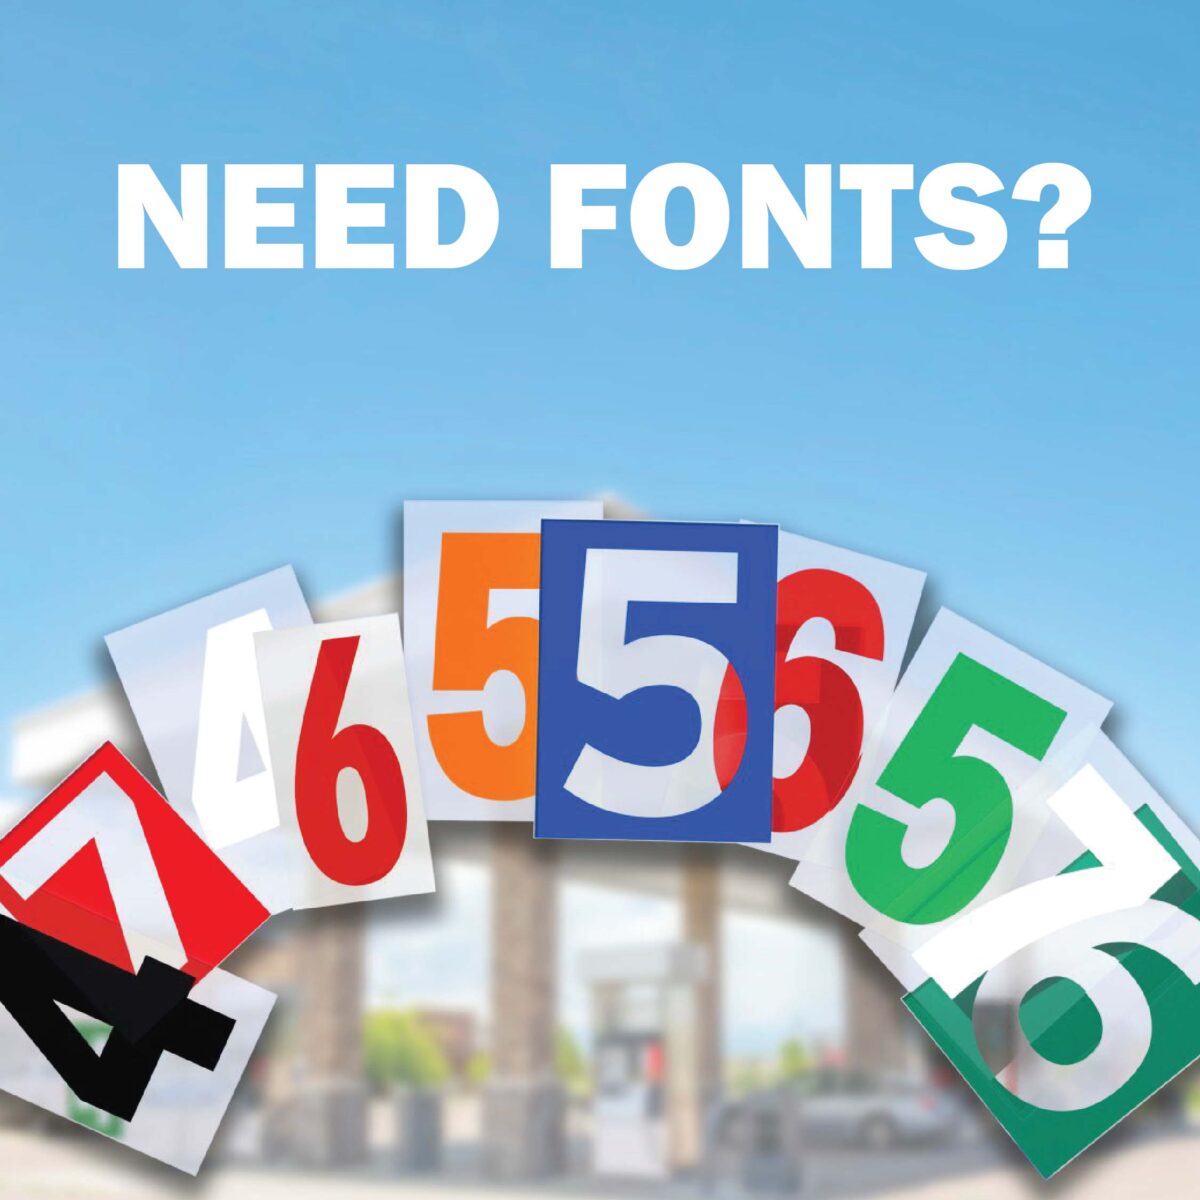 Need Fonts? Variety of shapes and sizes